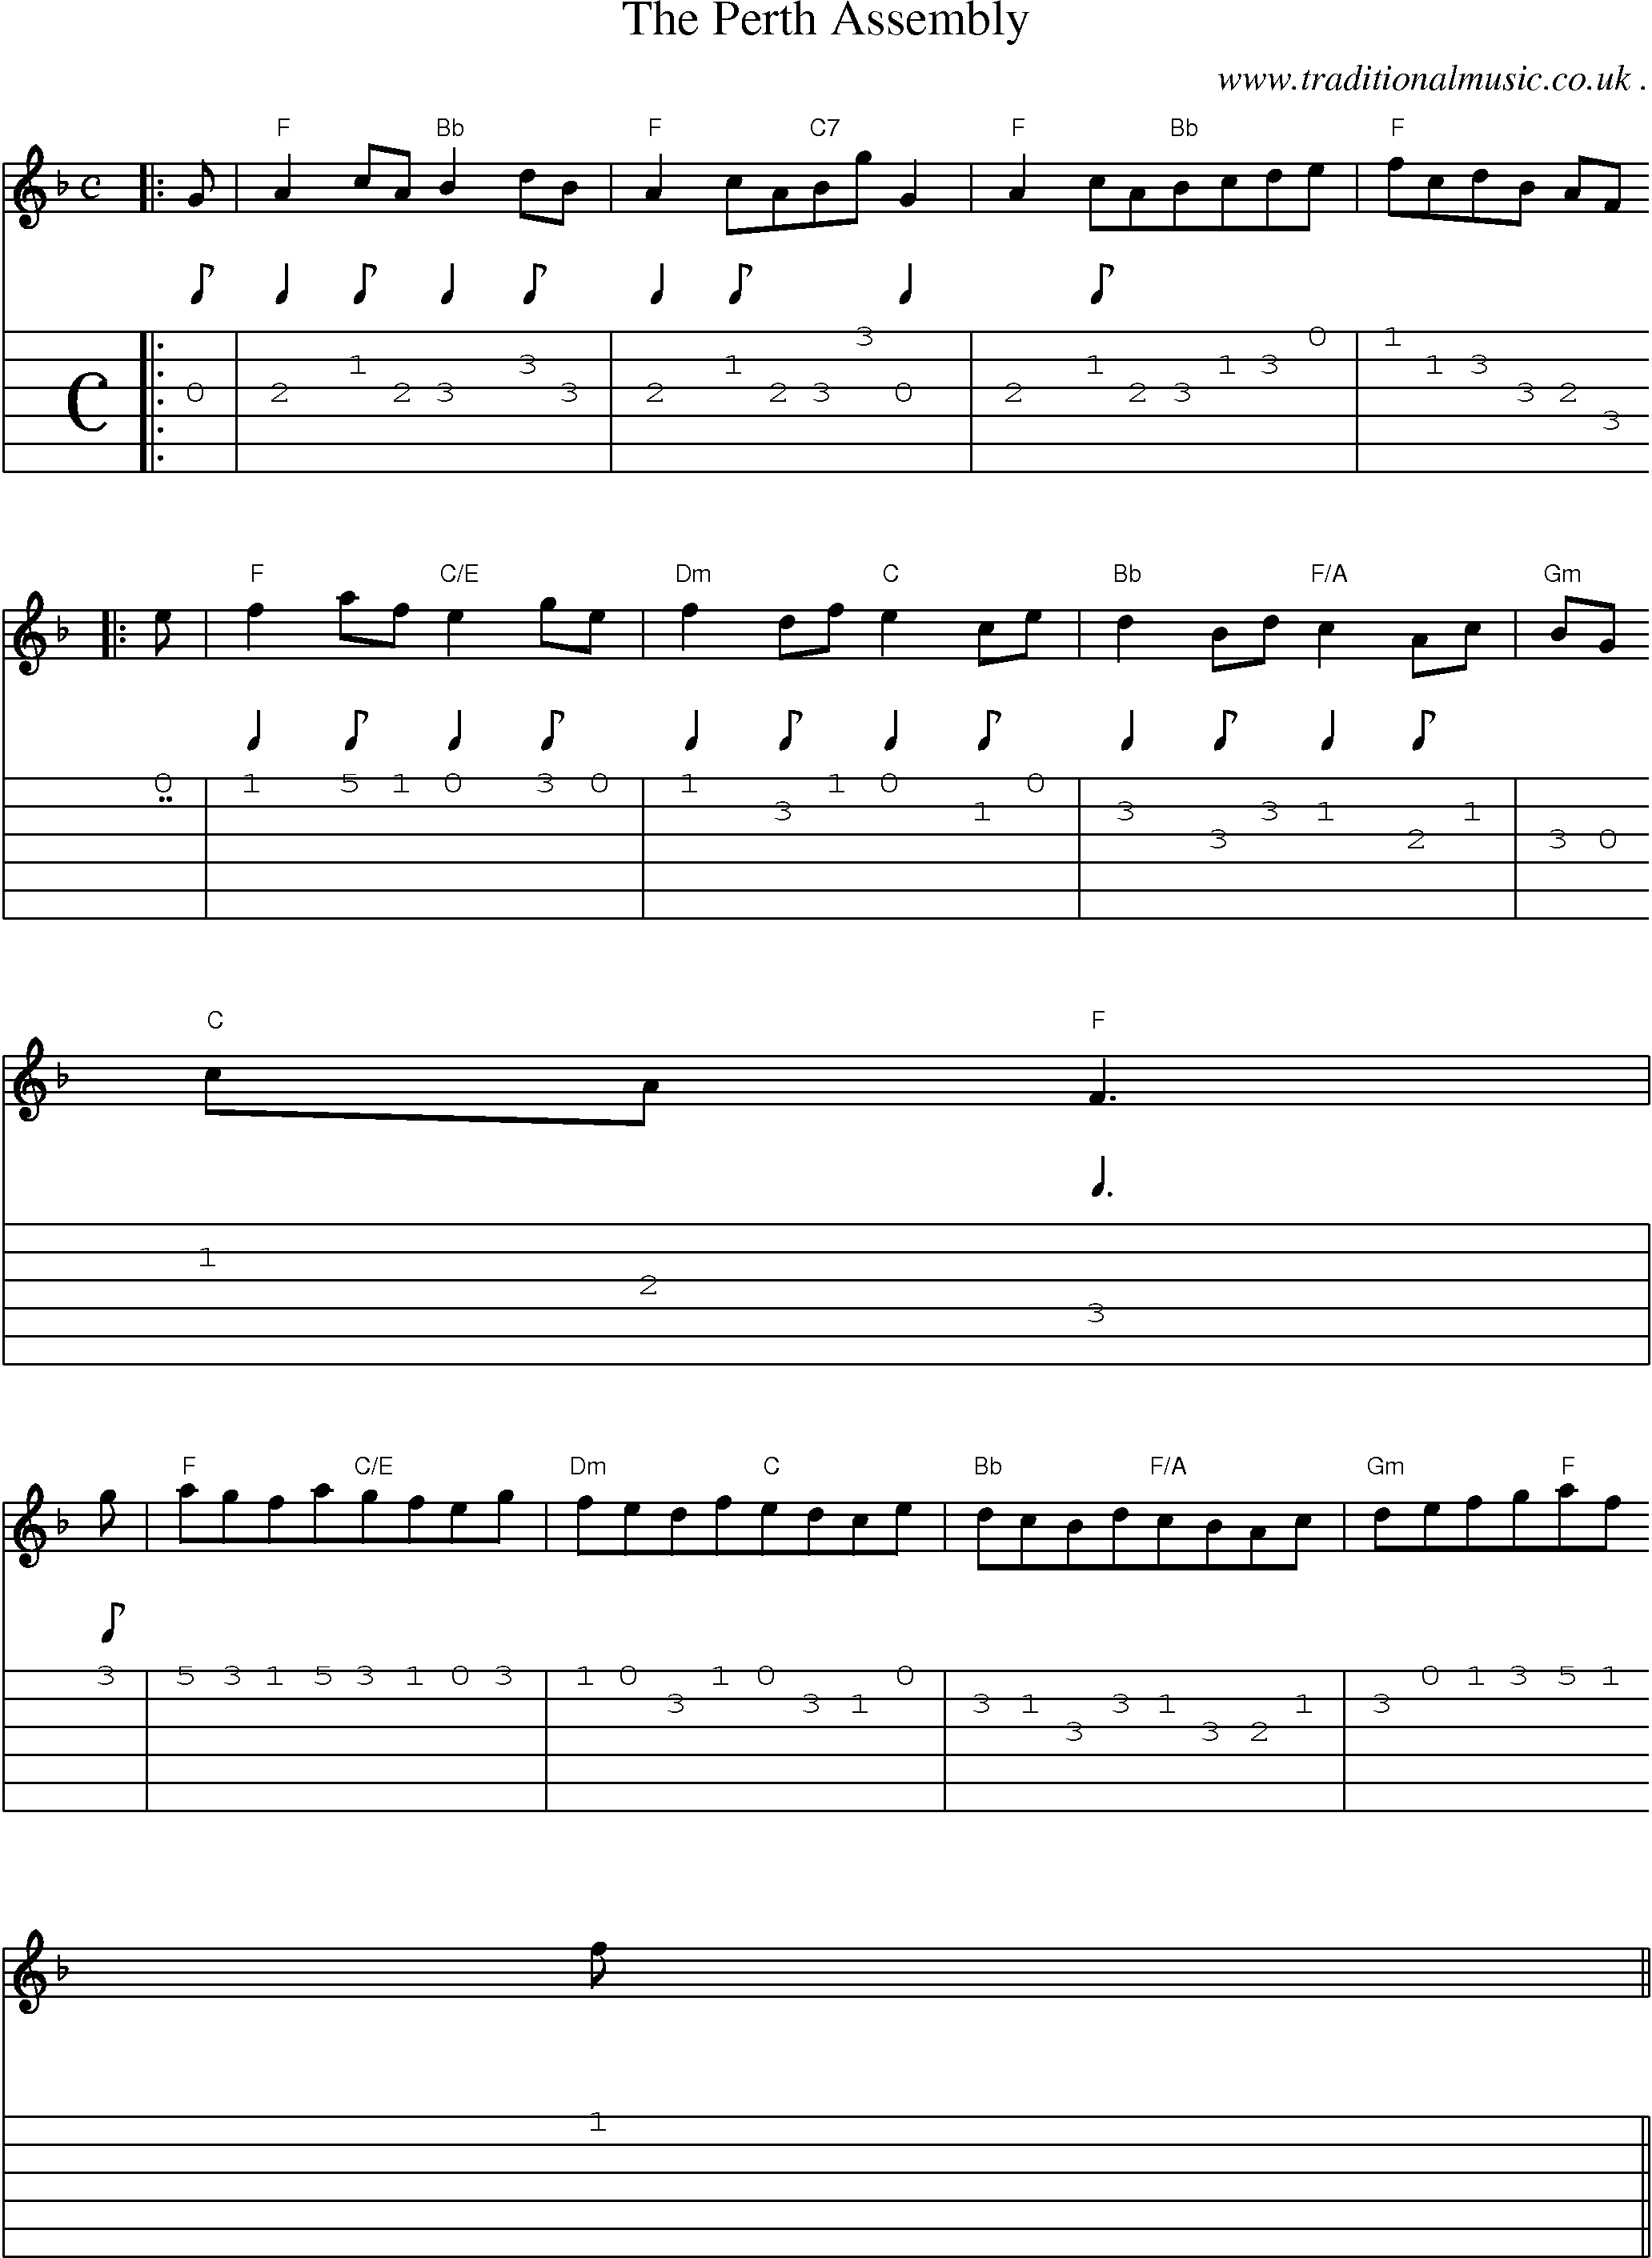 Sheet-Music and Guitar Tabs for The Perth Assembly